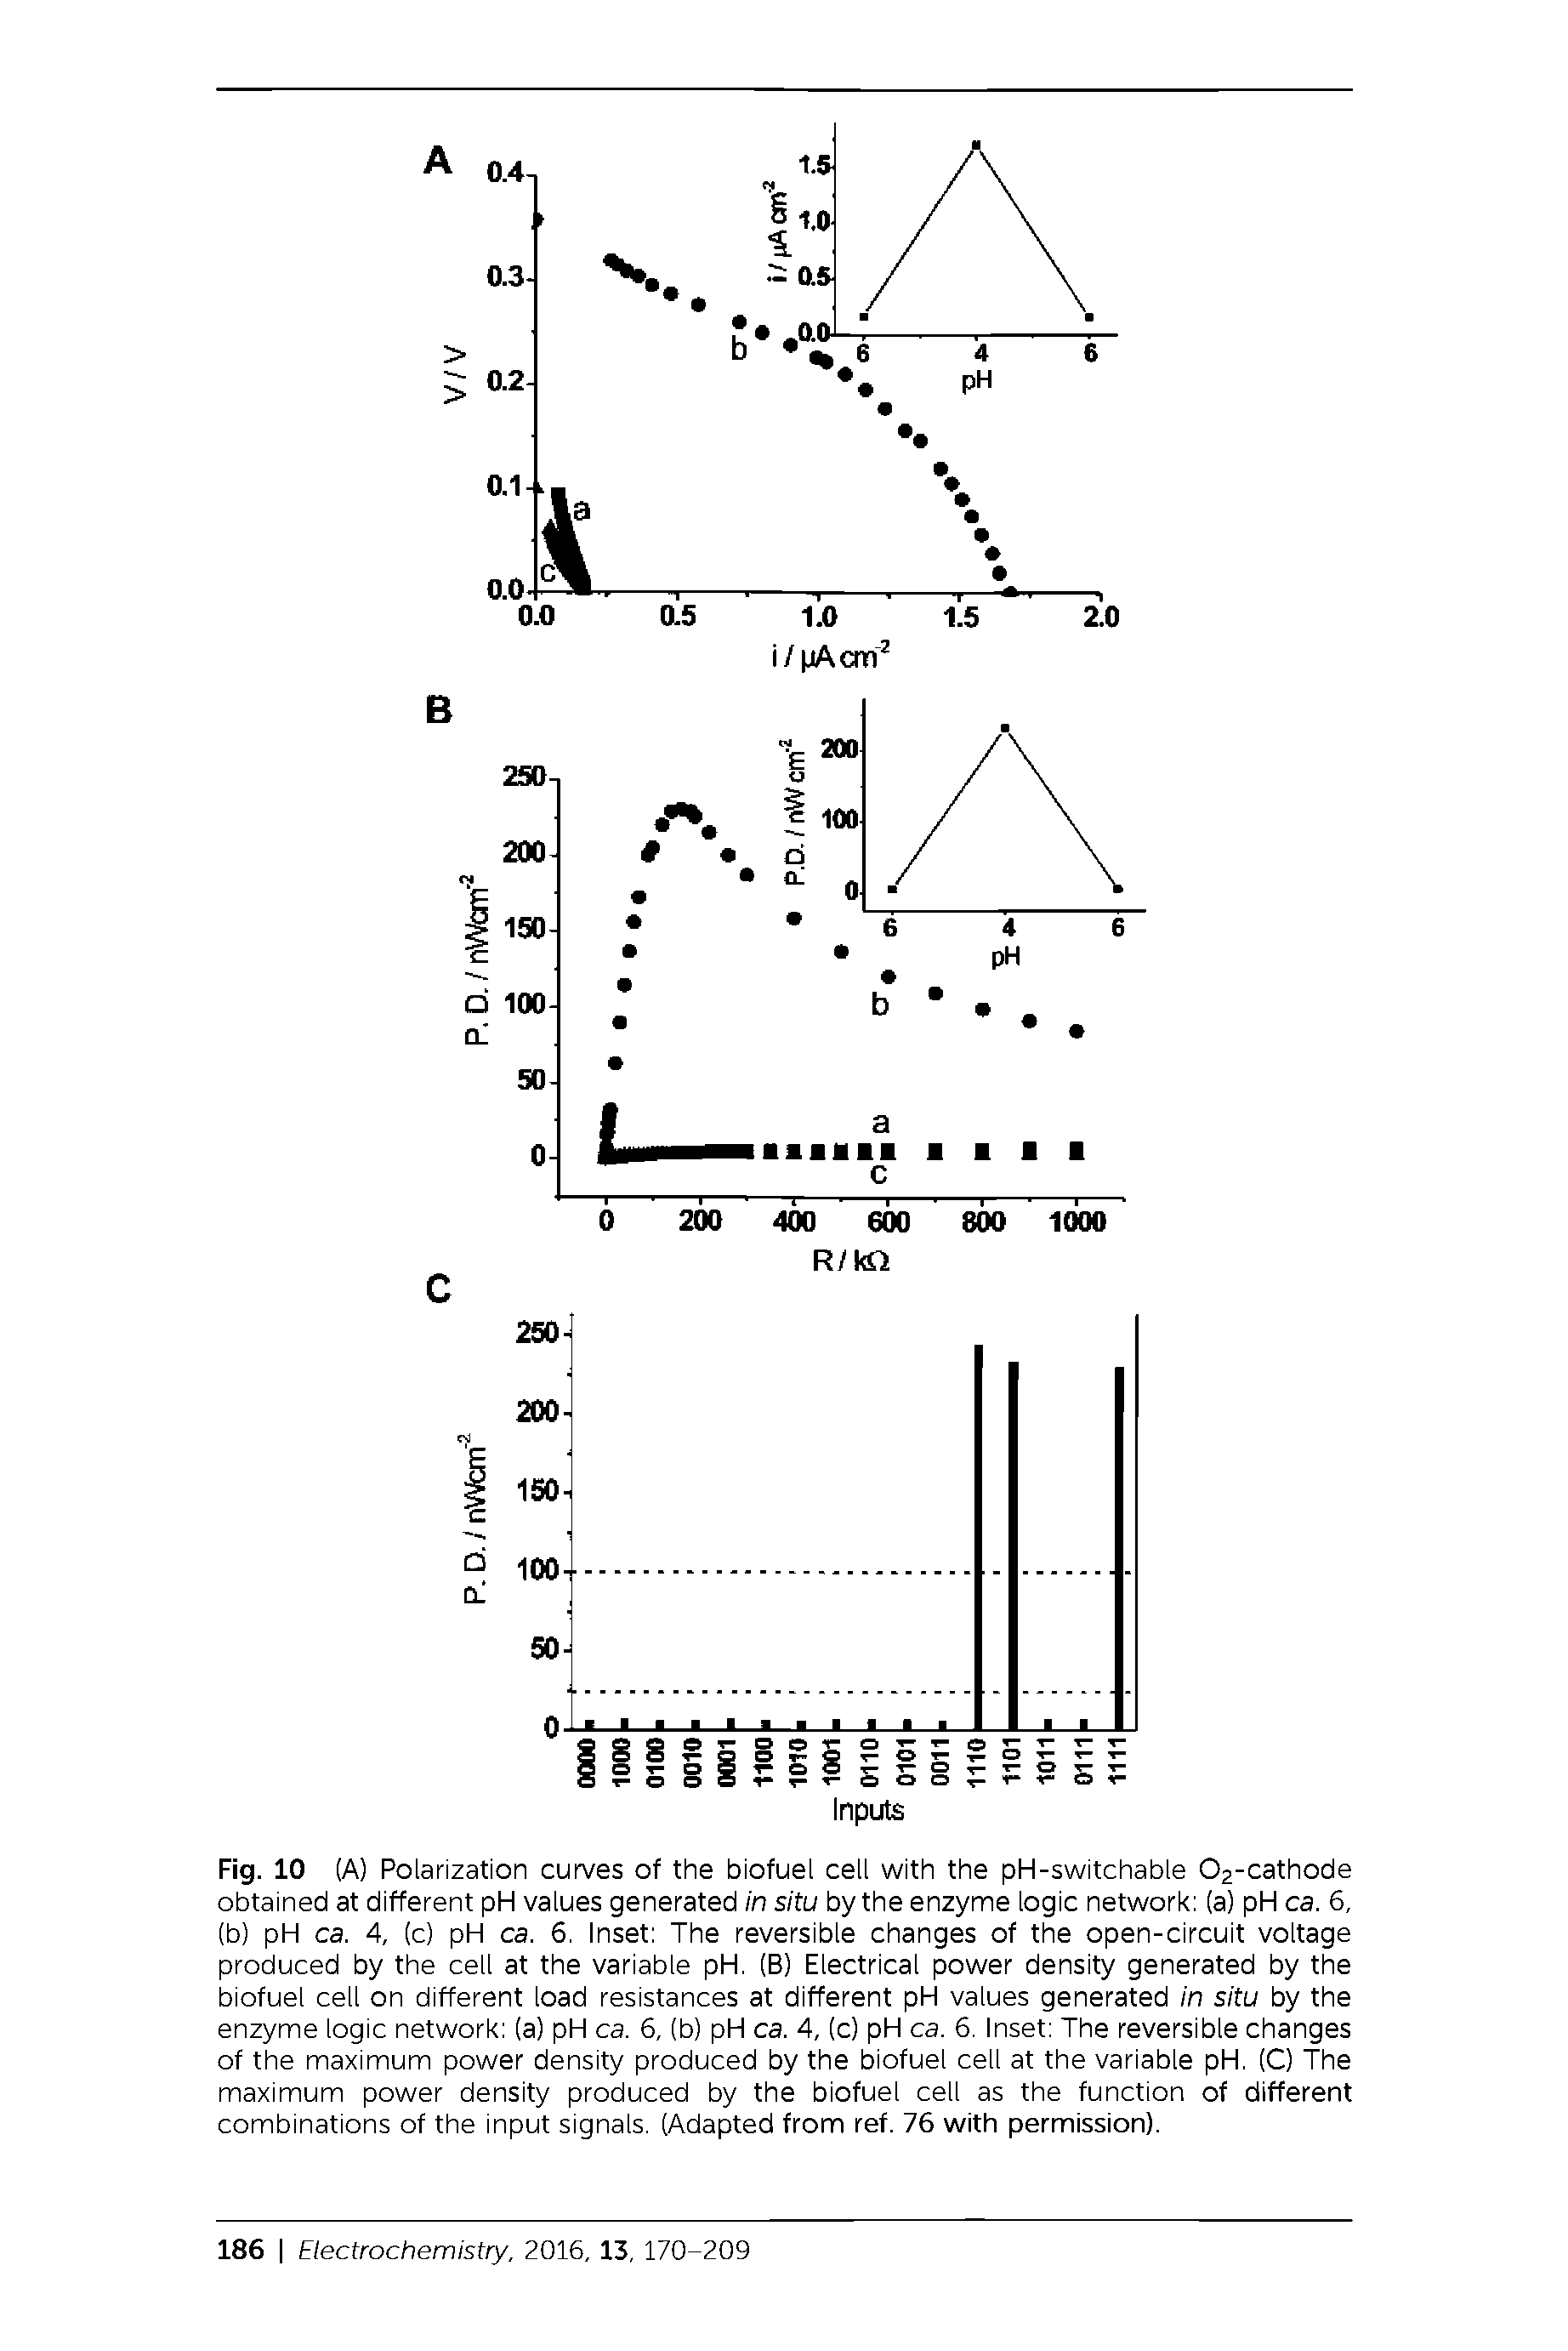 Fig. 10 (A) Polarization curves of the biofuel cell with the pH-switchable 02-cathode obtained at different pH values generated in situ by the enzyme logic network (a) pH ca. 6, (b) pH ca. 4, (c) pH ca. 6. Inset The reversible changes of the open-circuit voltage produced by the cell at the variable pH. (B) Electrical power density generated by the biofuel cell on different load resistances at different pH values generated in situ by the enzyme logic network (a) pH ca. 6, (b) pH ca. 4, (c) pH ca. 6. Inset The reversible changes of the maximum power density produced by the biofuel cell at the variable pH, (C) The maximum power density produced by the biofuel cell as the function of different combinations of the input signals. (Adapted from ref. 76 with permission).